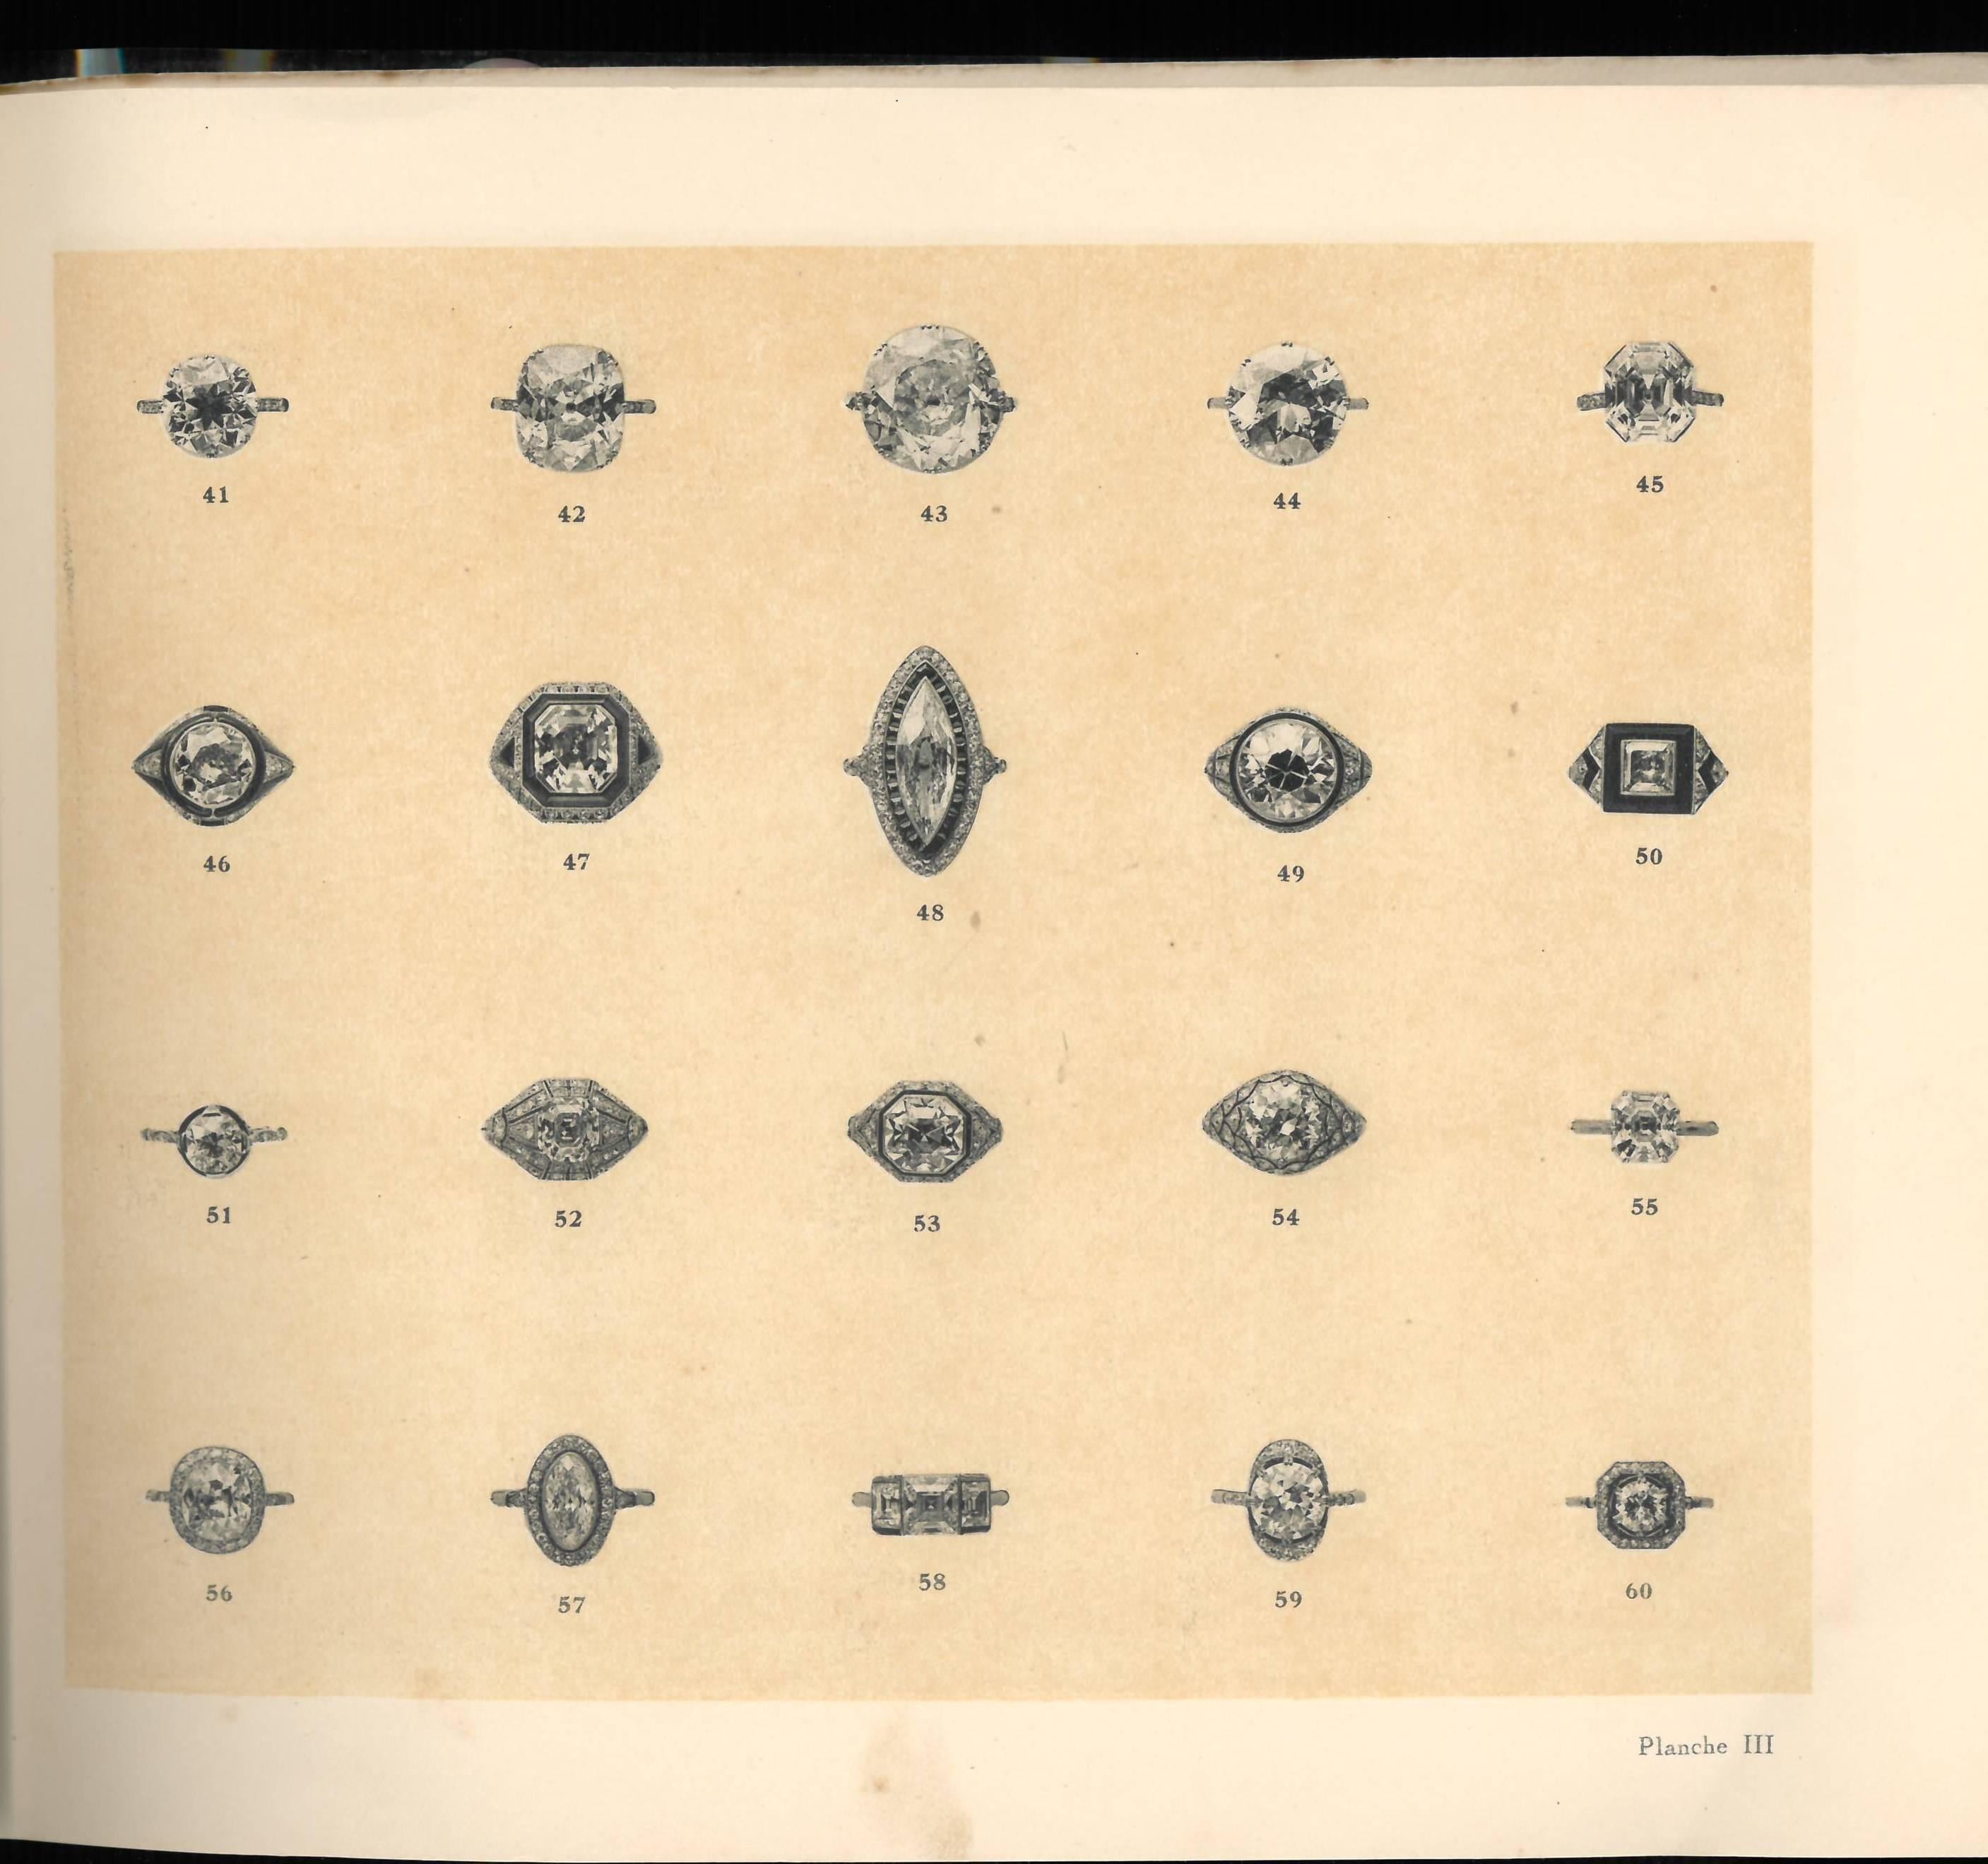 This is a rare trade catalogue produced by the House of Mauboussin to show their designs and pieces of jewellery. There are 32 plates in both colour and black & white together with the original price lists. There is a range including - rings,